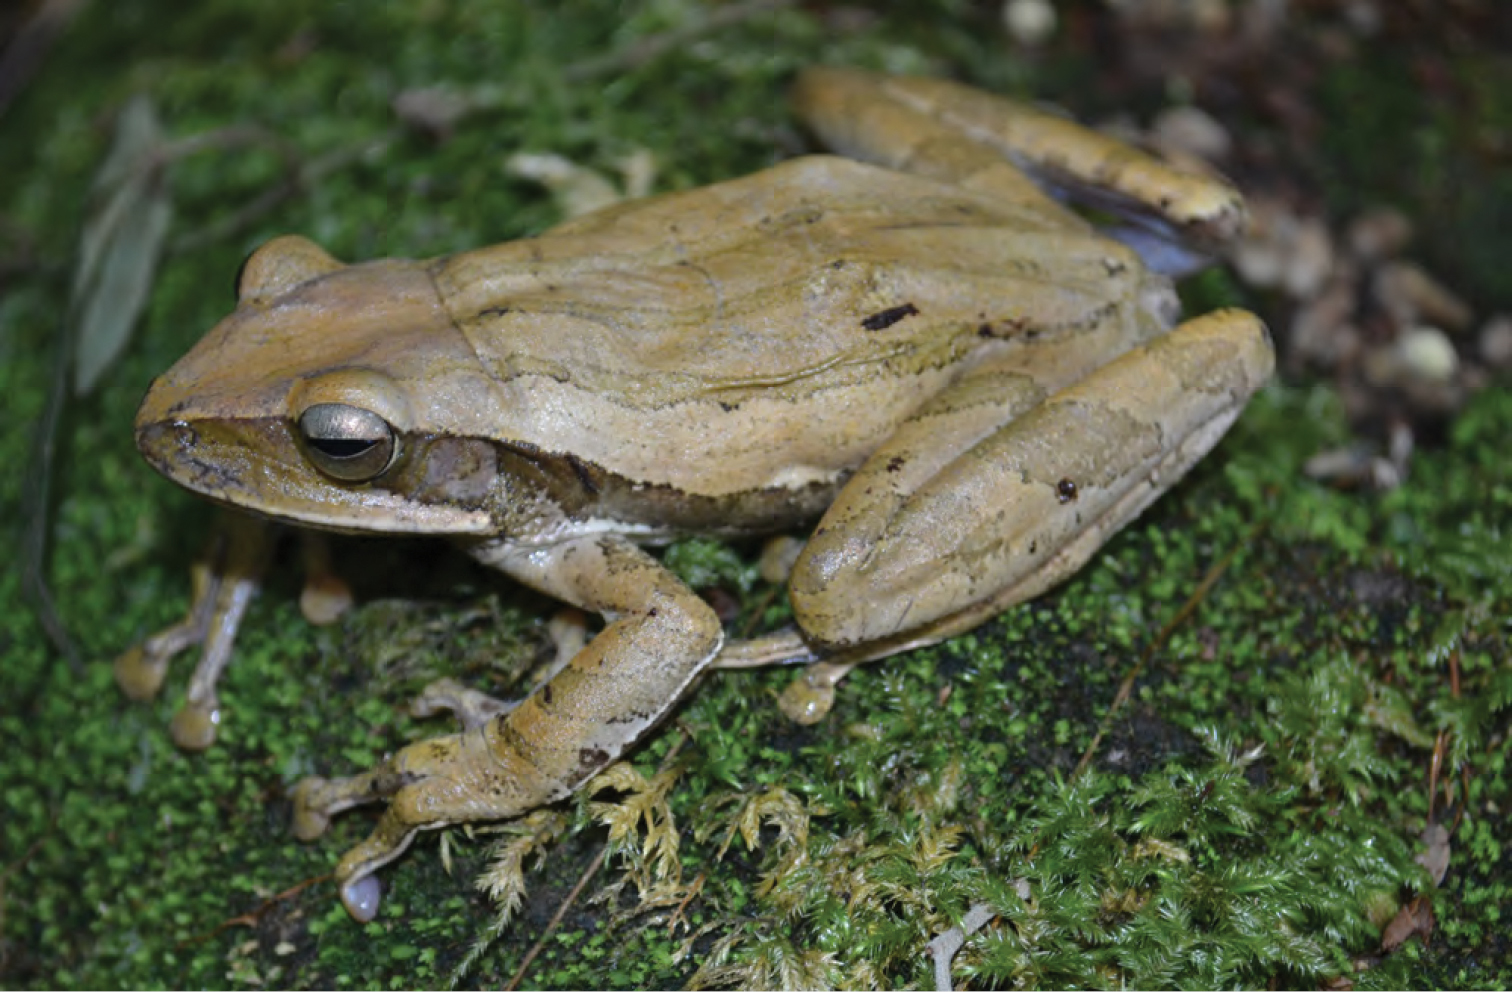 What are the characteristics of an Asian tree frog?